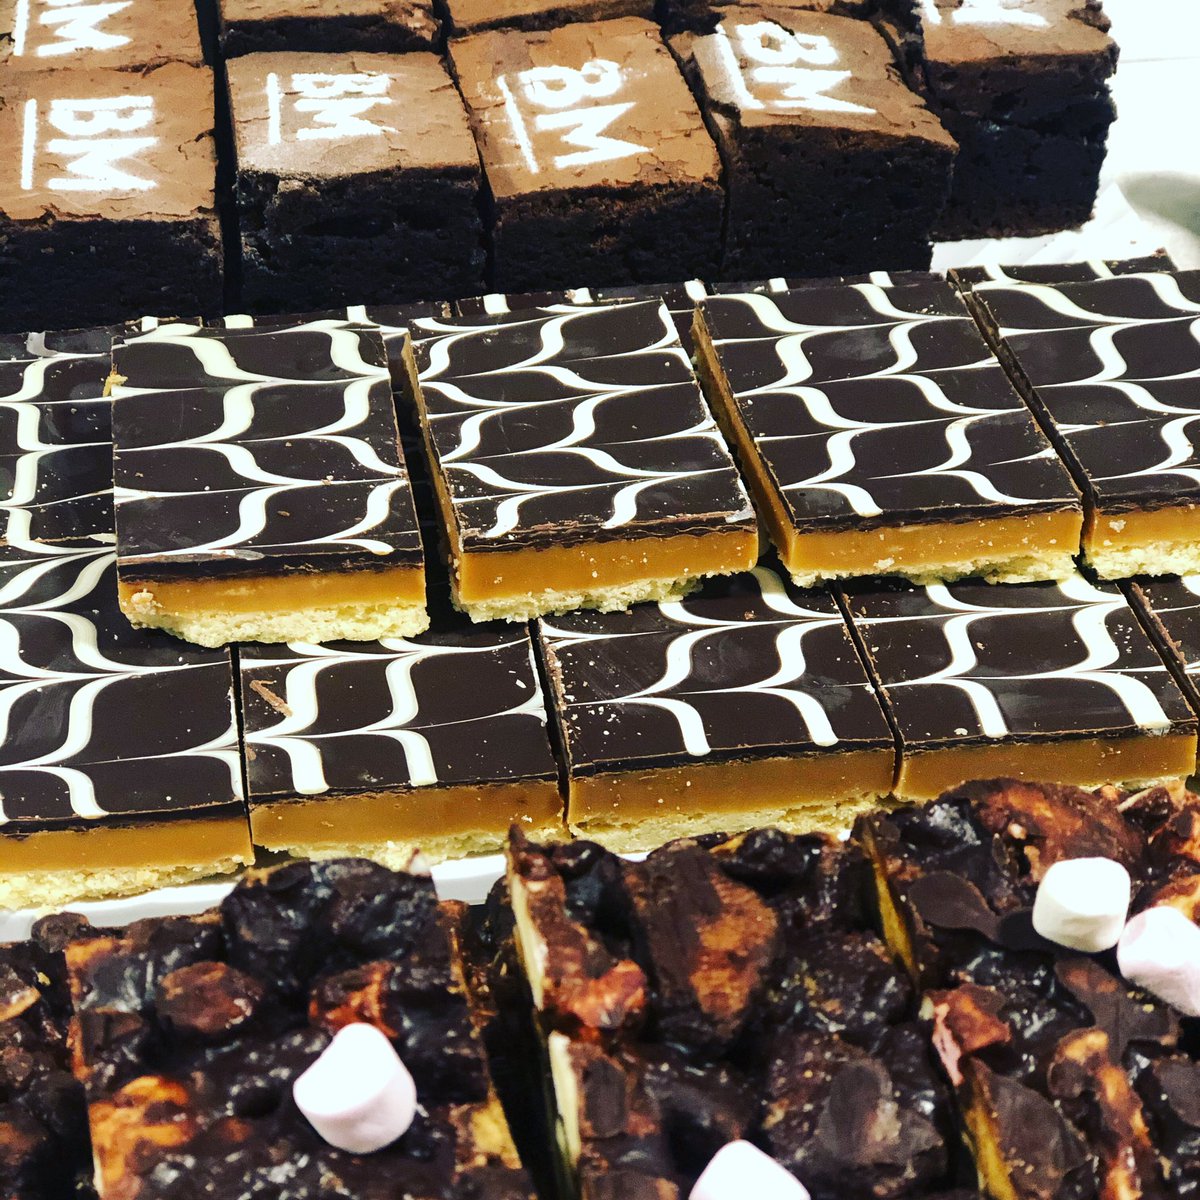 Anyone need a chocolate fix today? Open from 10.30am till 3pm 😋👩🏻‍🍳🙌🧁🥮 #bredaspantry #whalley #chocolatebrownies #rockyroad #millionaireshortbread